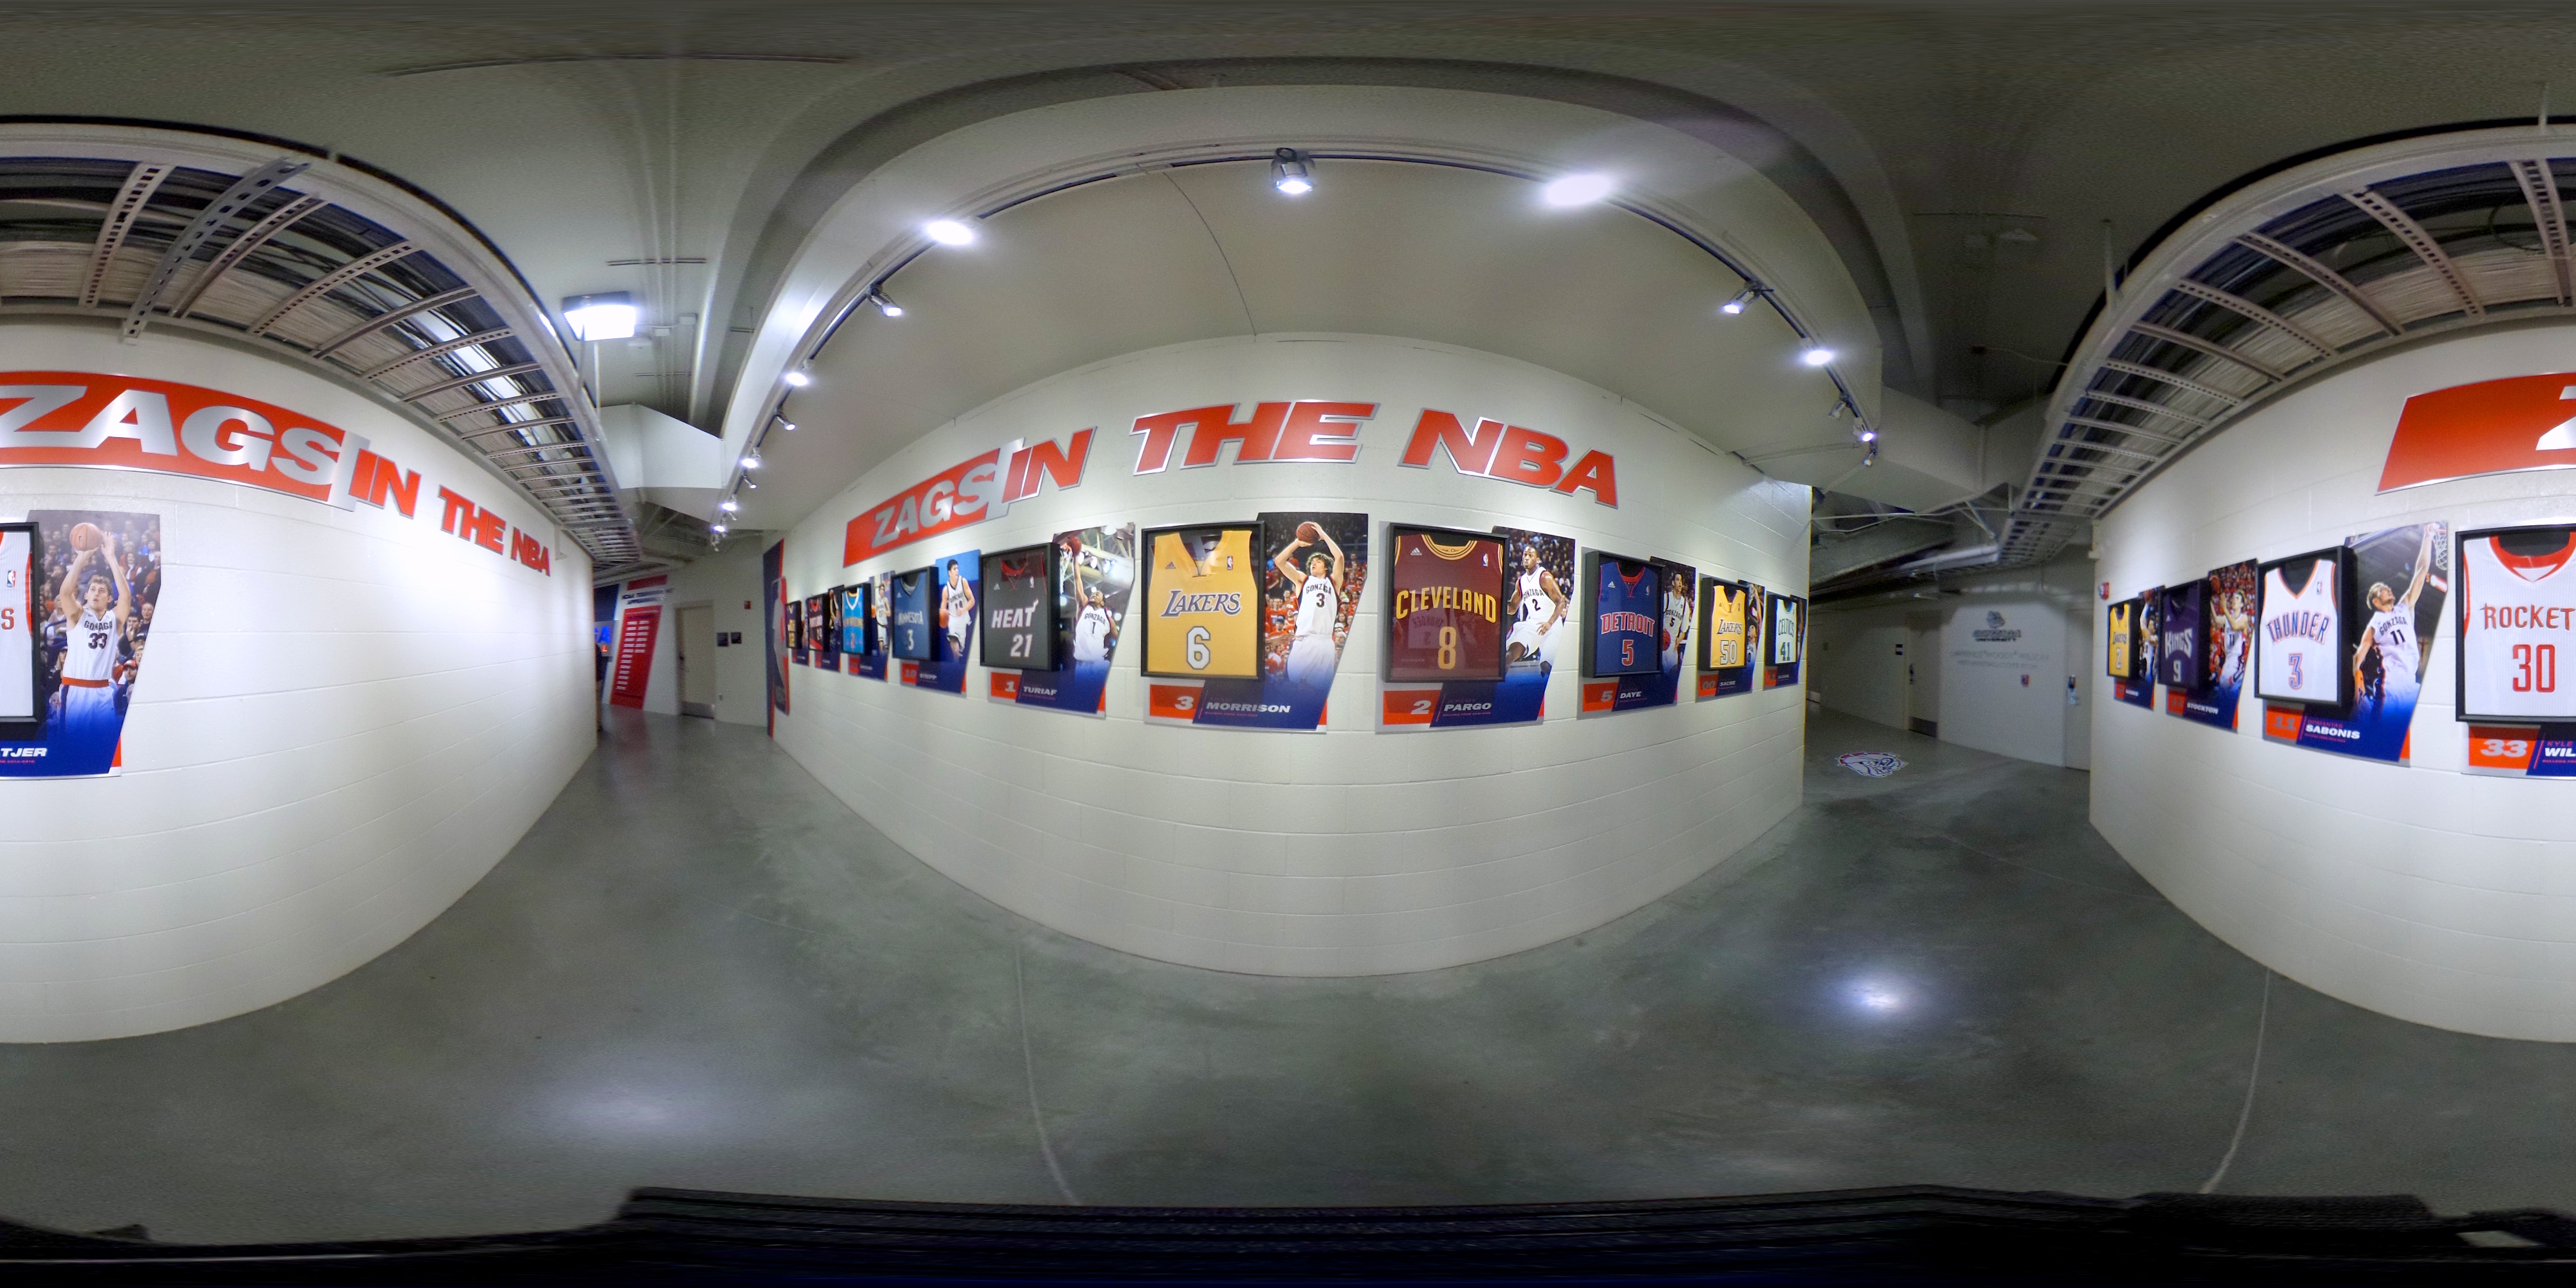 Behind the scenes: Zags in the NBA